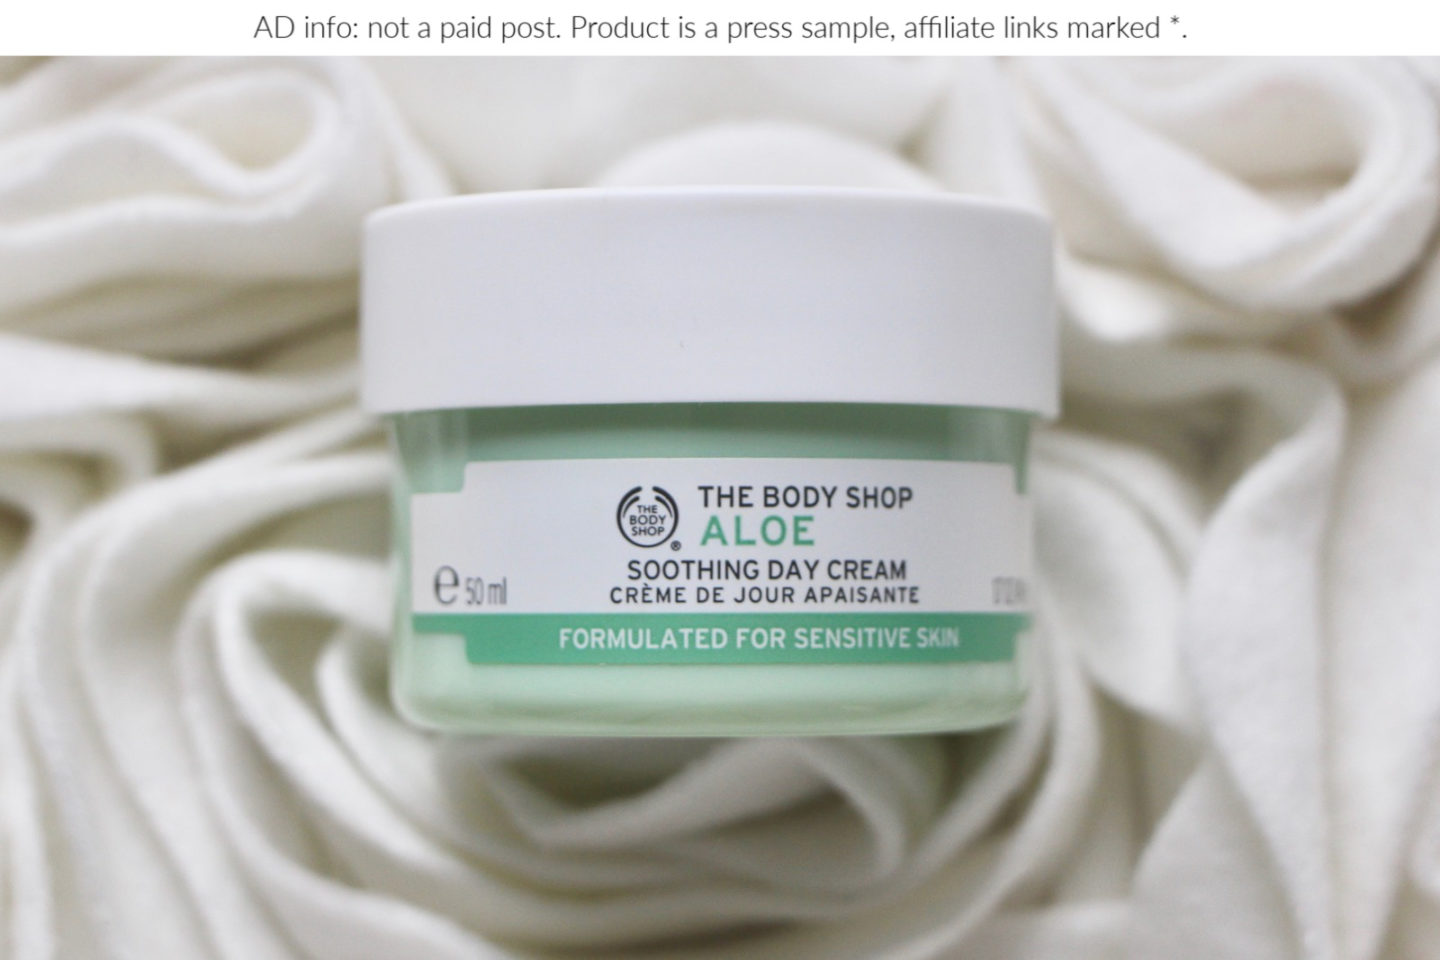 Skincare Review: The Body Shop Aloe Soothing Day Cream